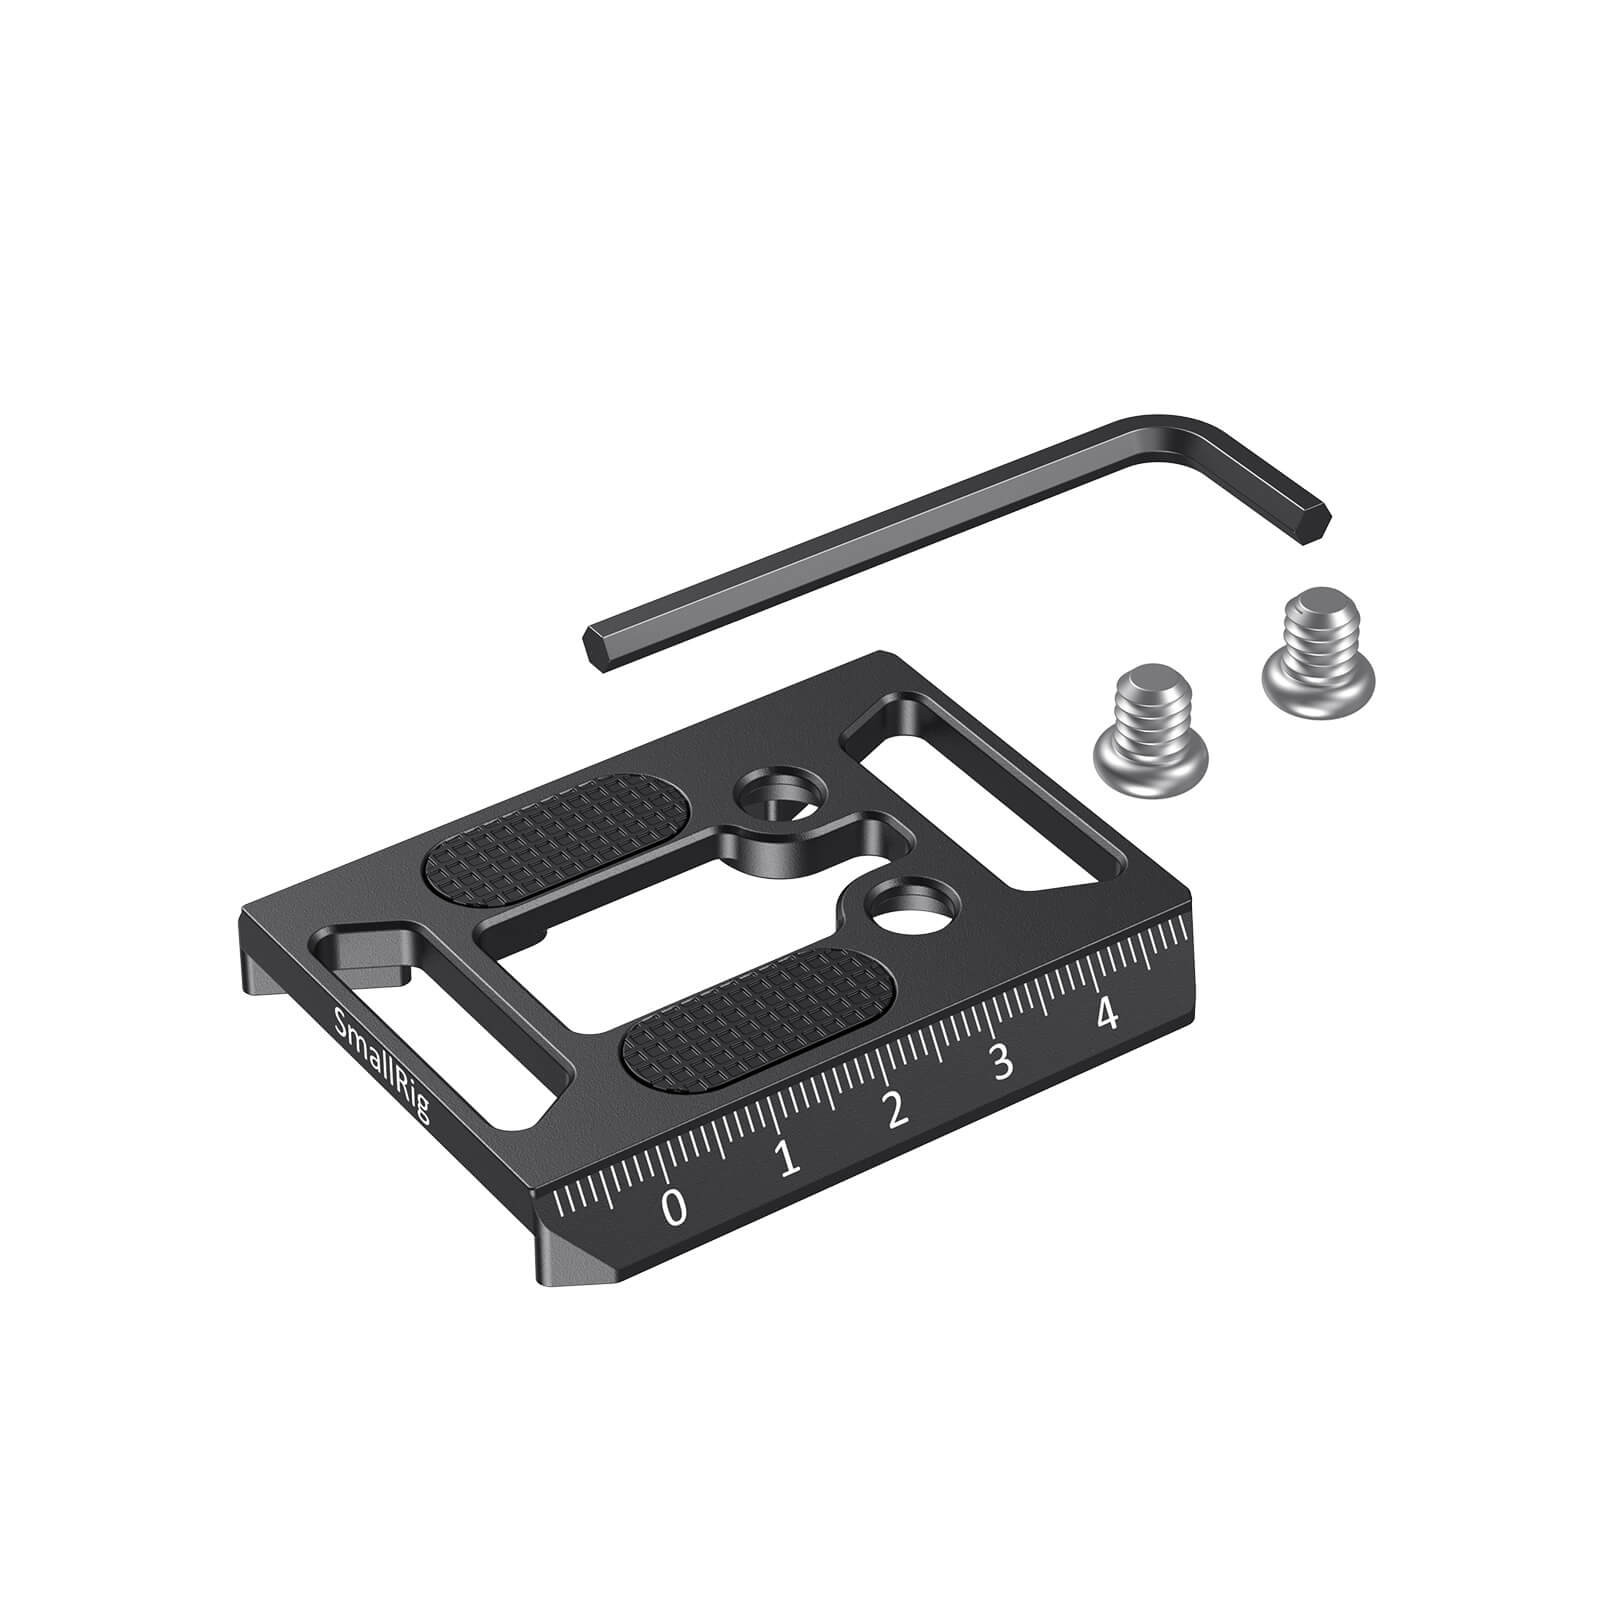 SmallRig Manfrotto 501PL-Type Quick Release Plate for Select SmallRig Cages APU2458